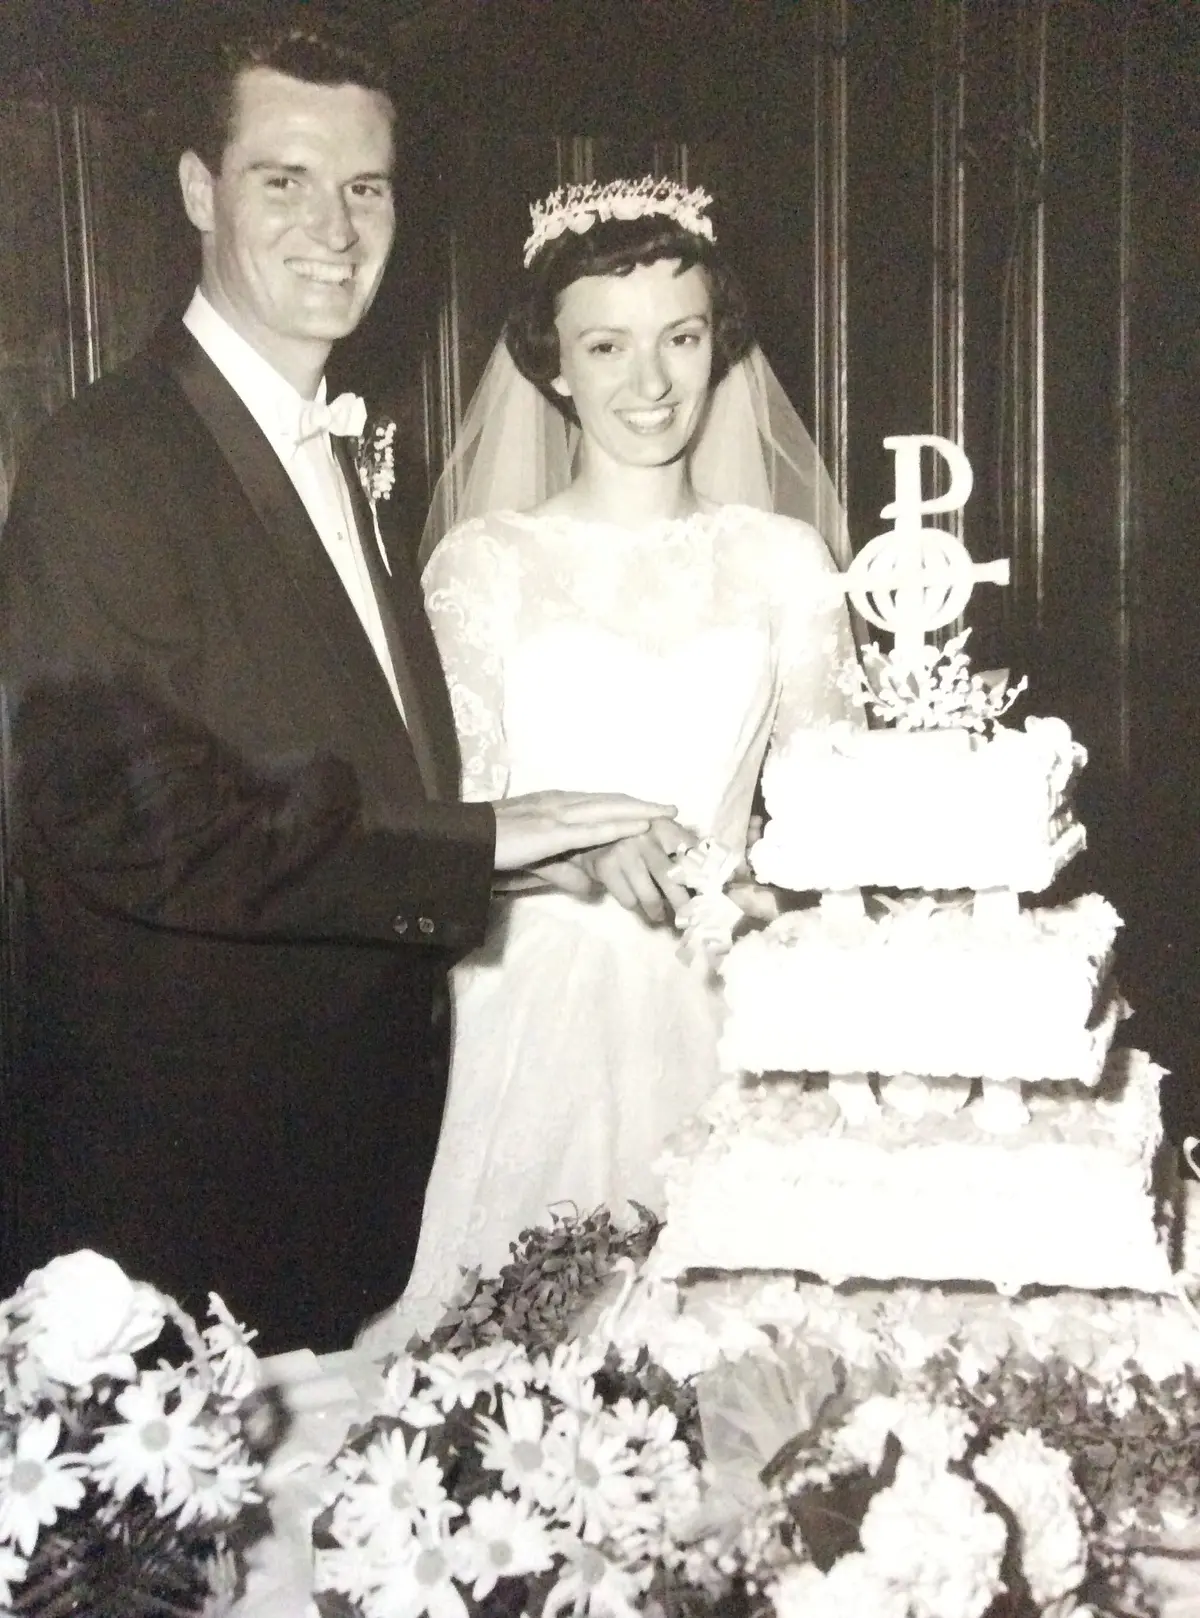 Pop with his wife at their wedding. (Courtesy of <a href="https://www.instagram.com/popshappybreakfast/">@popshappybreakfast</a>)